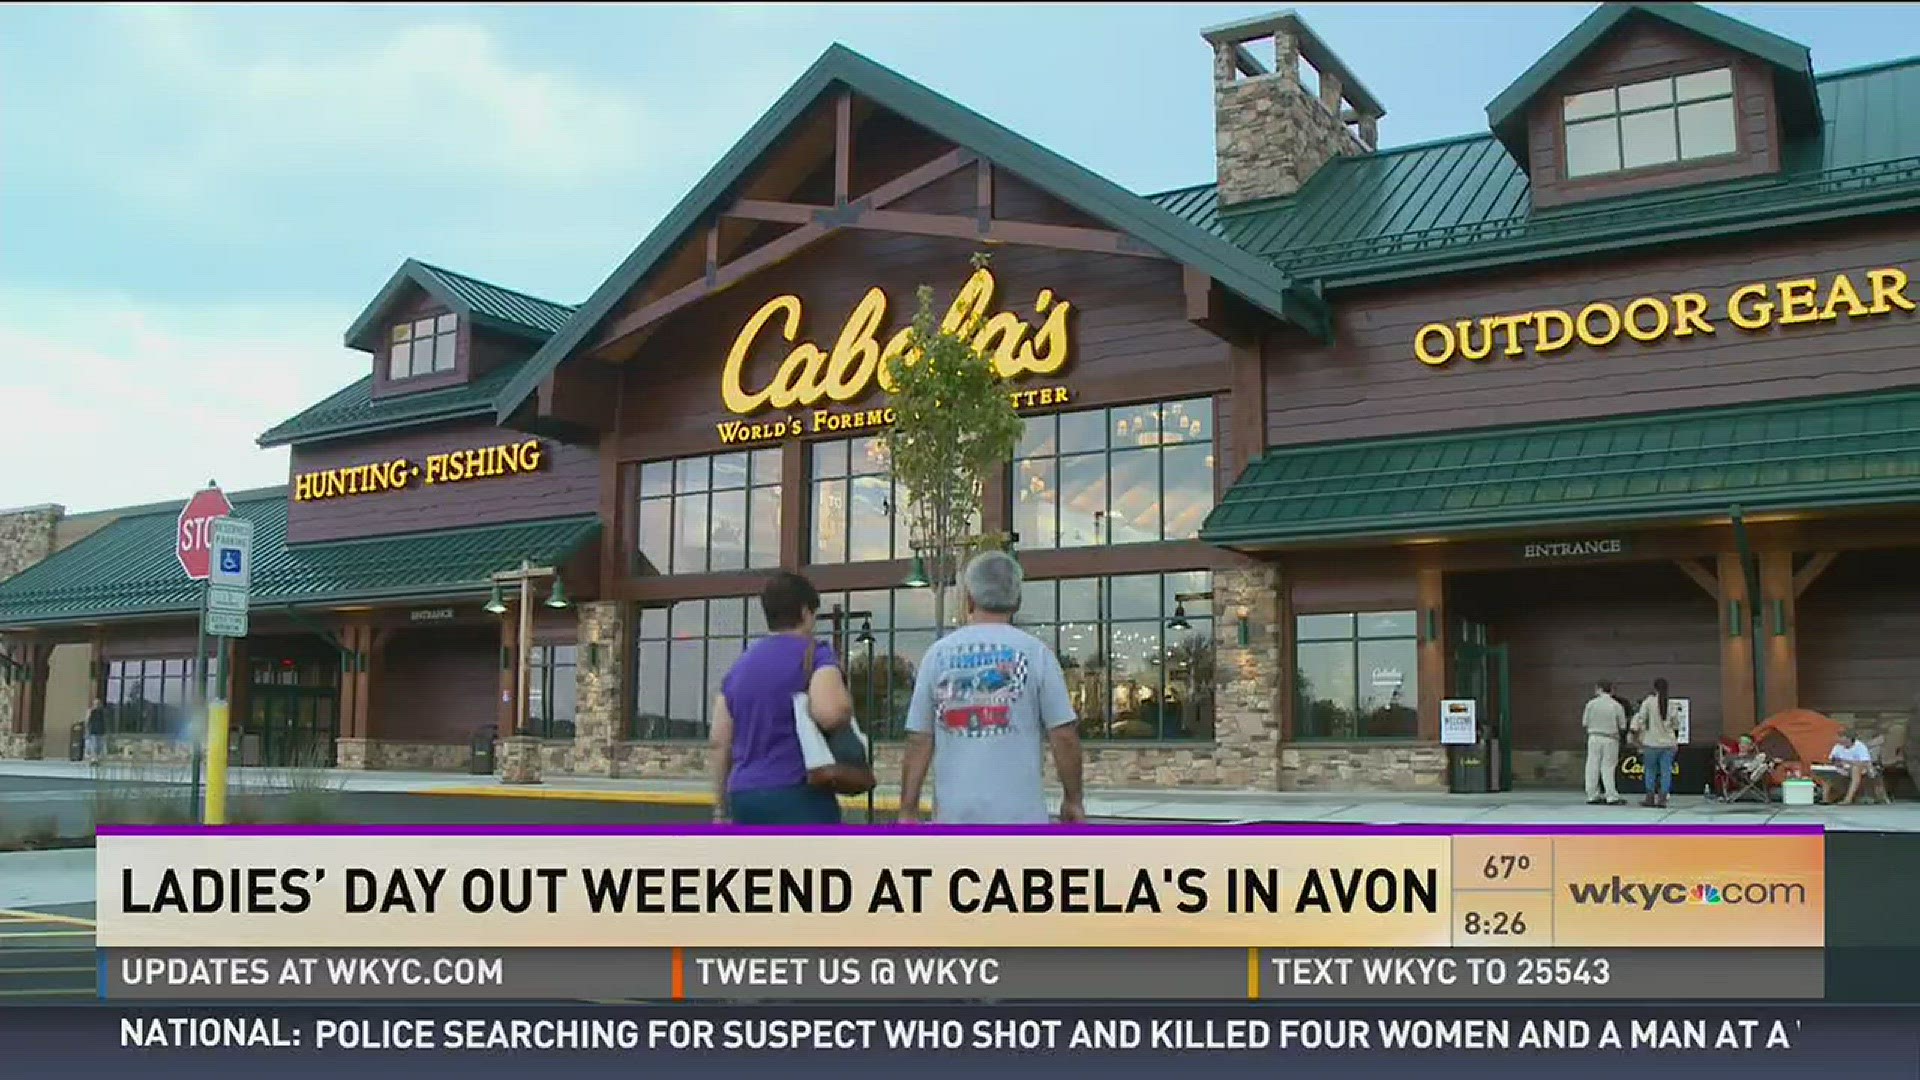 Ladies' Day Out Weekend At Cabela's In Avon